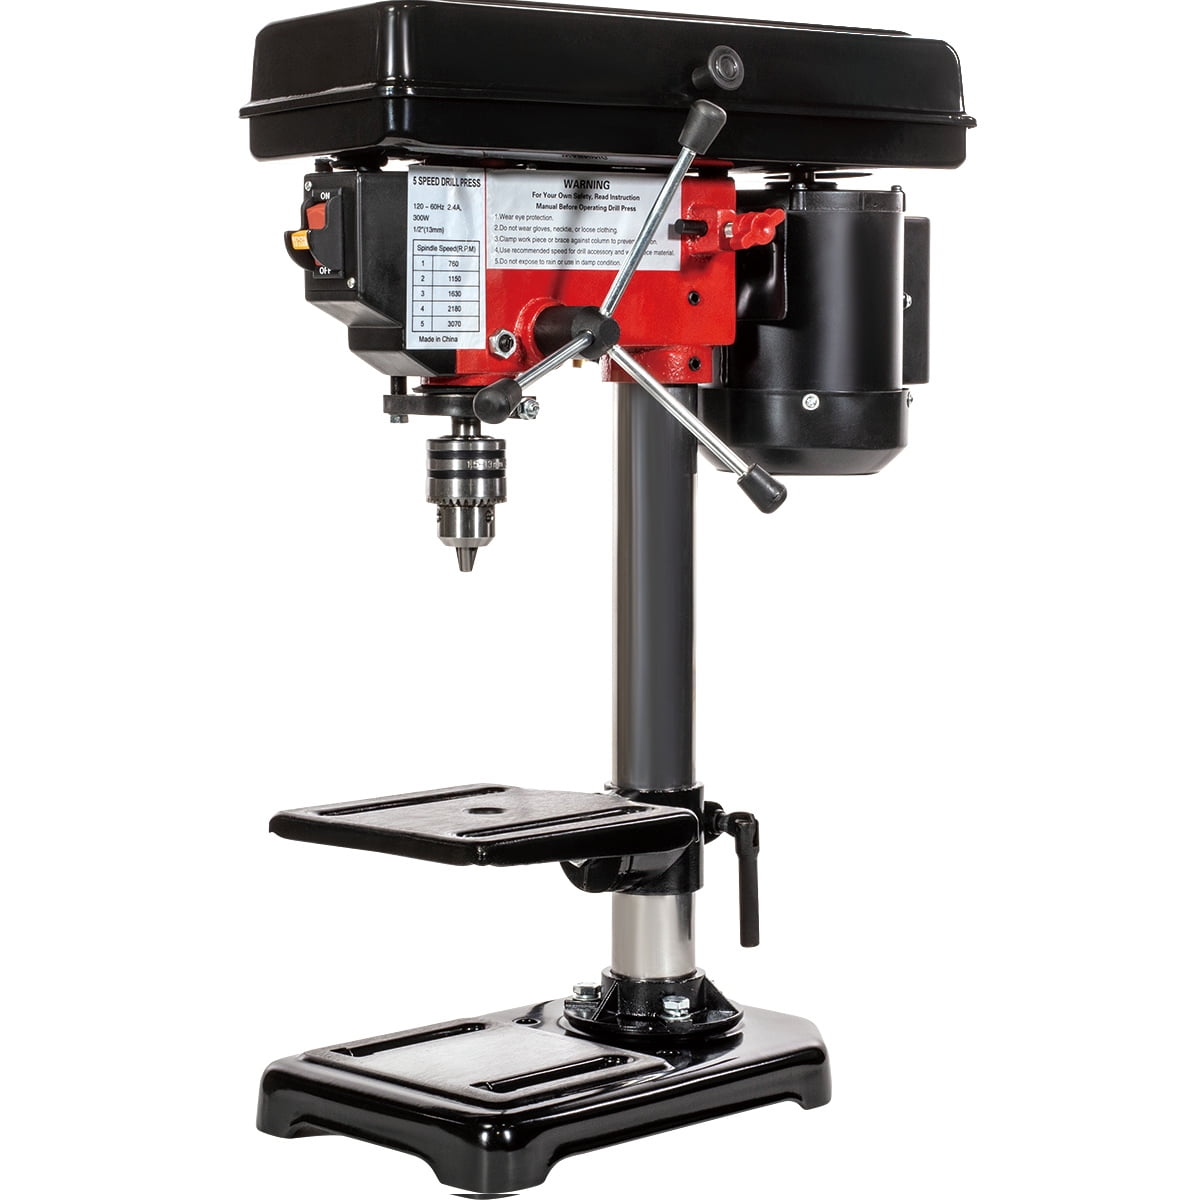 5 Speed Bench Pillar Drill Press for Wood or Metal Hobby Portable Pedestal Drill 